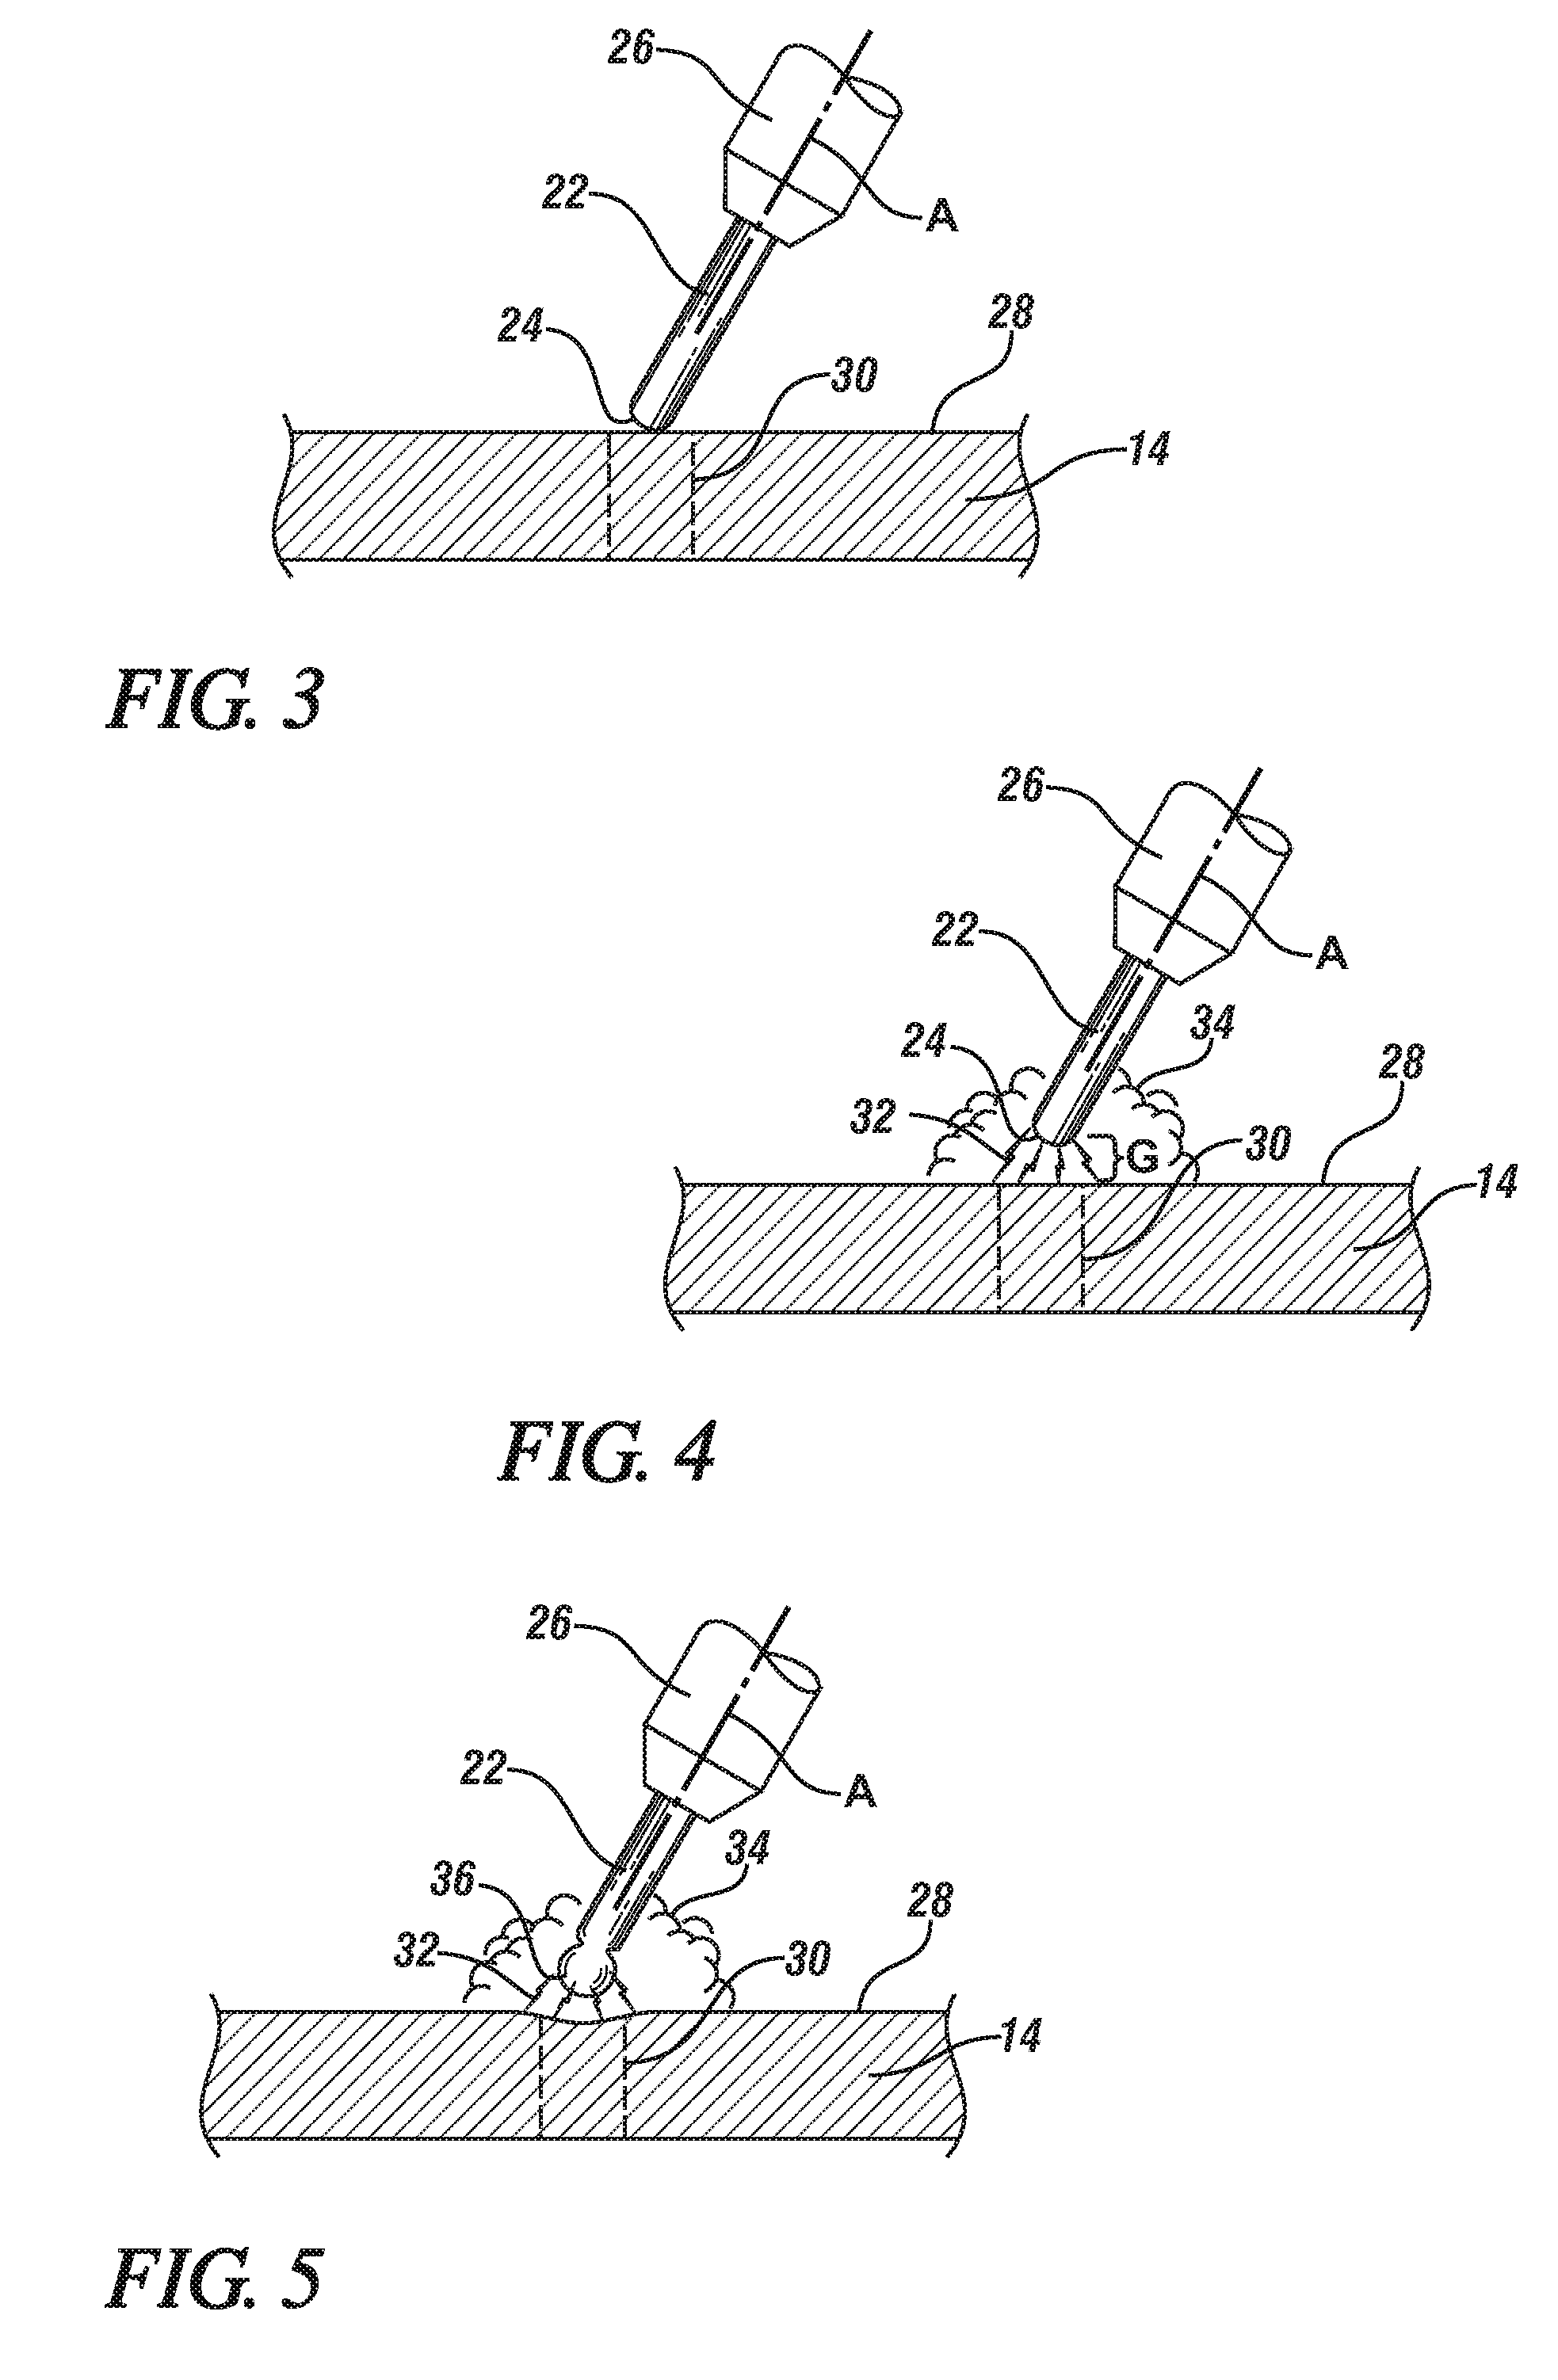 Reaction material pre-placement for reaction metallurgical joining